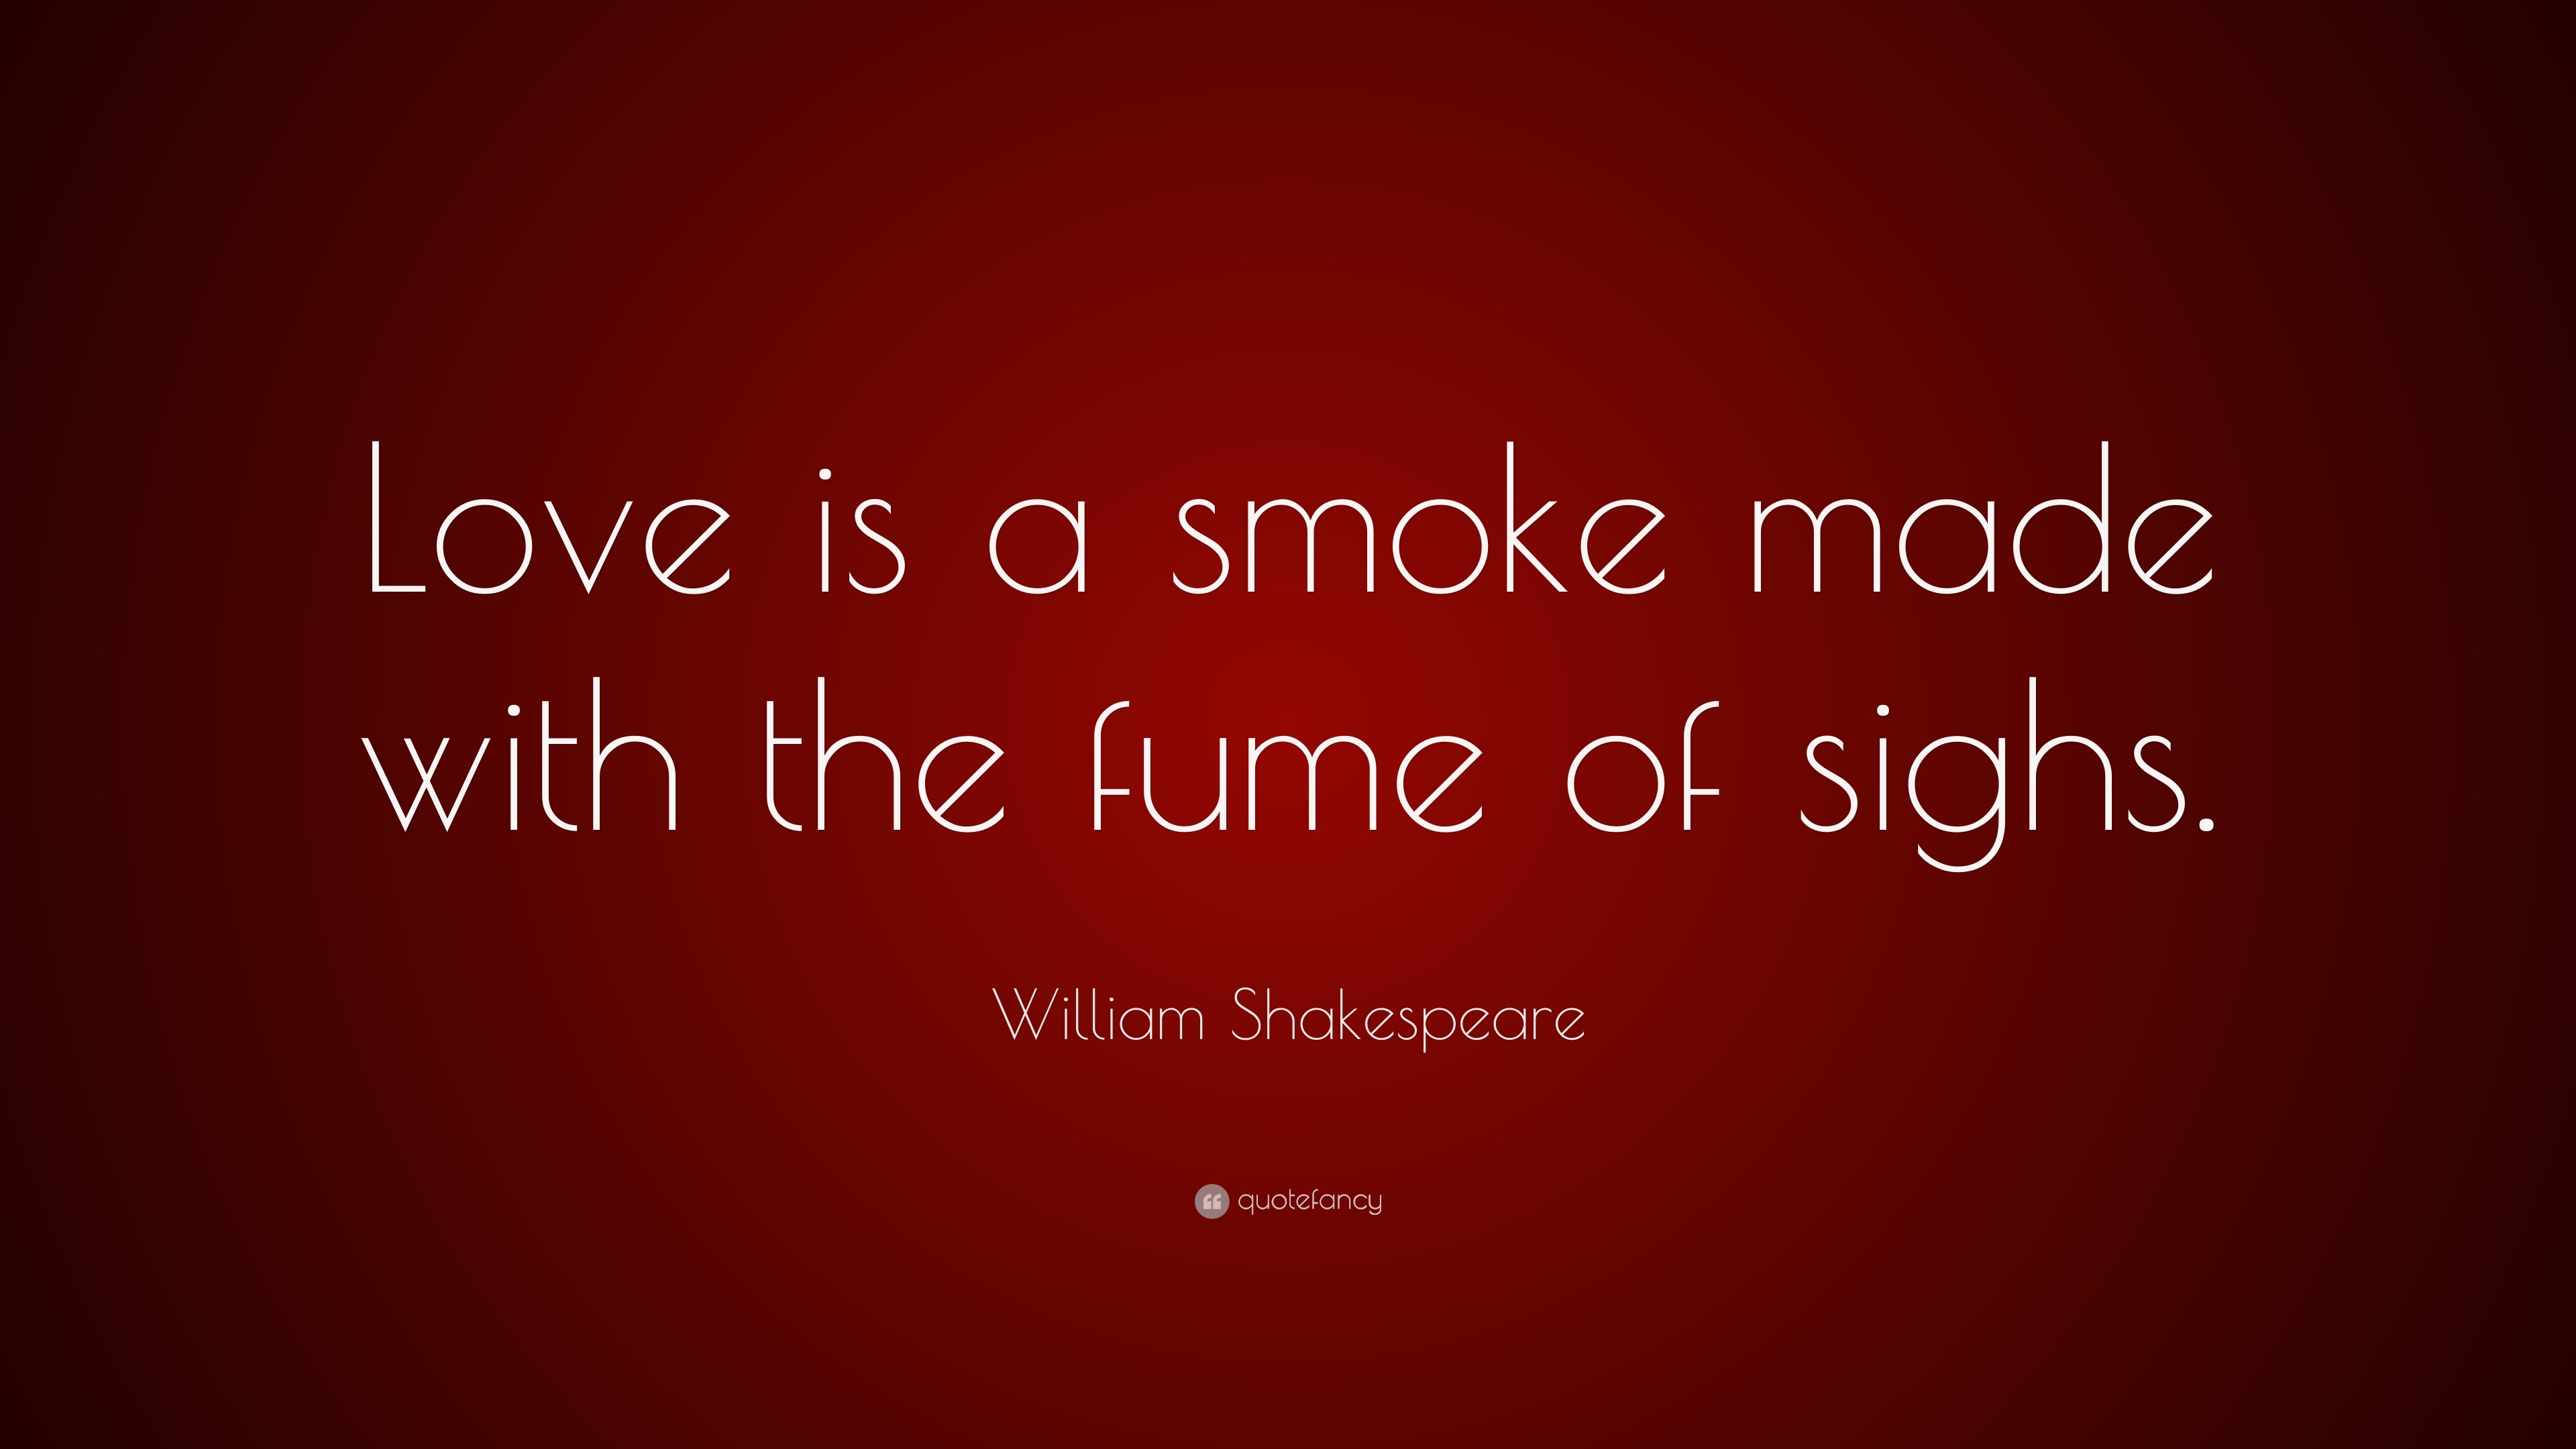 William Shakespeare Quote “Love is a smoke made with the fume of sighs